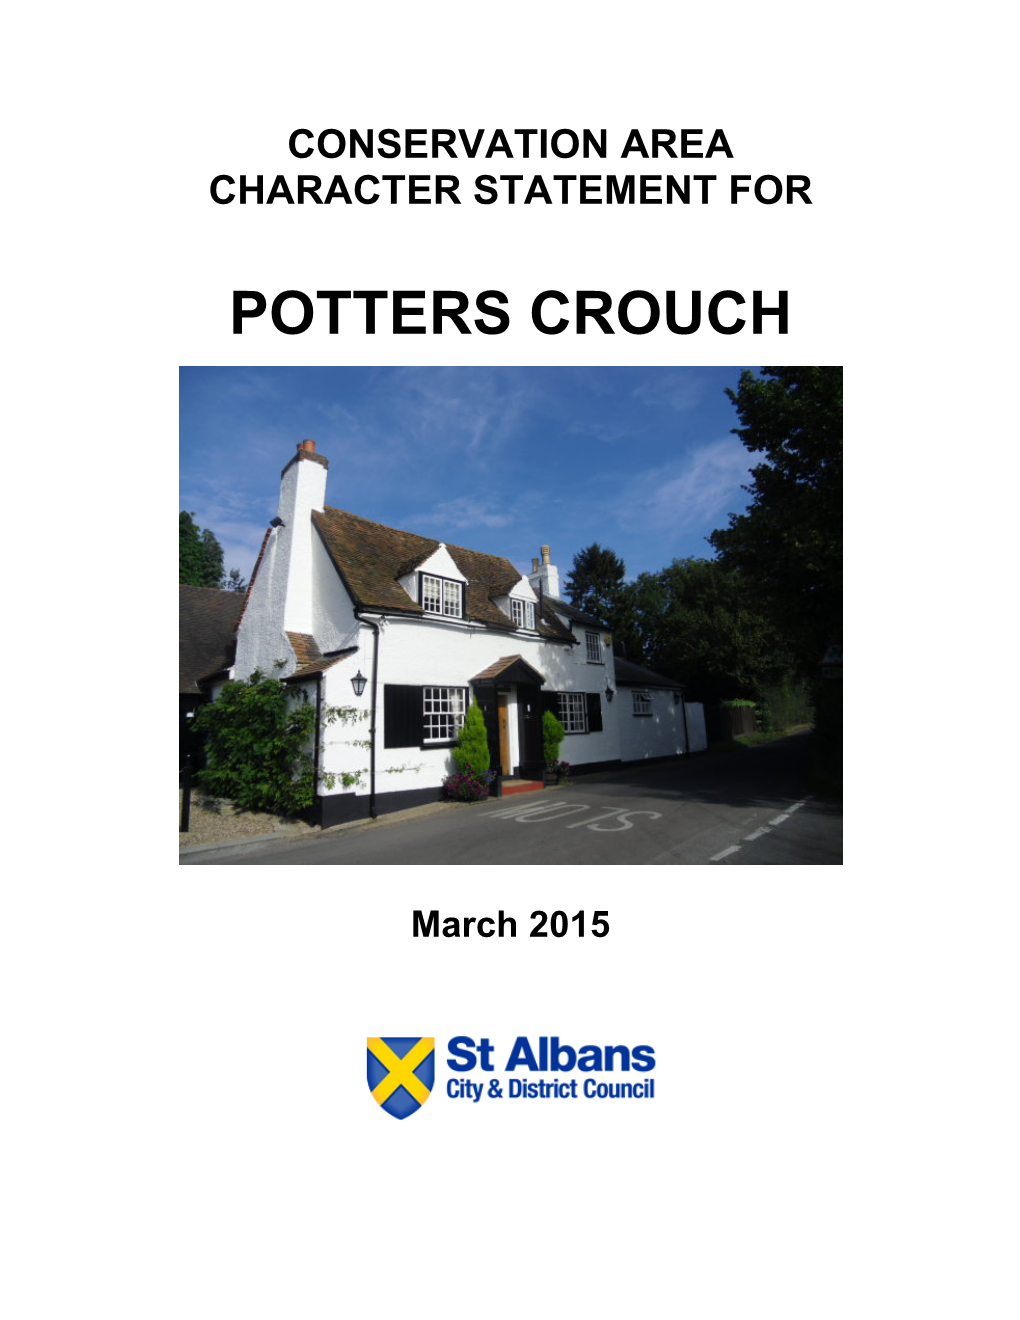 Potters Crouch